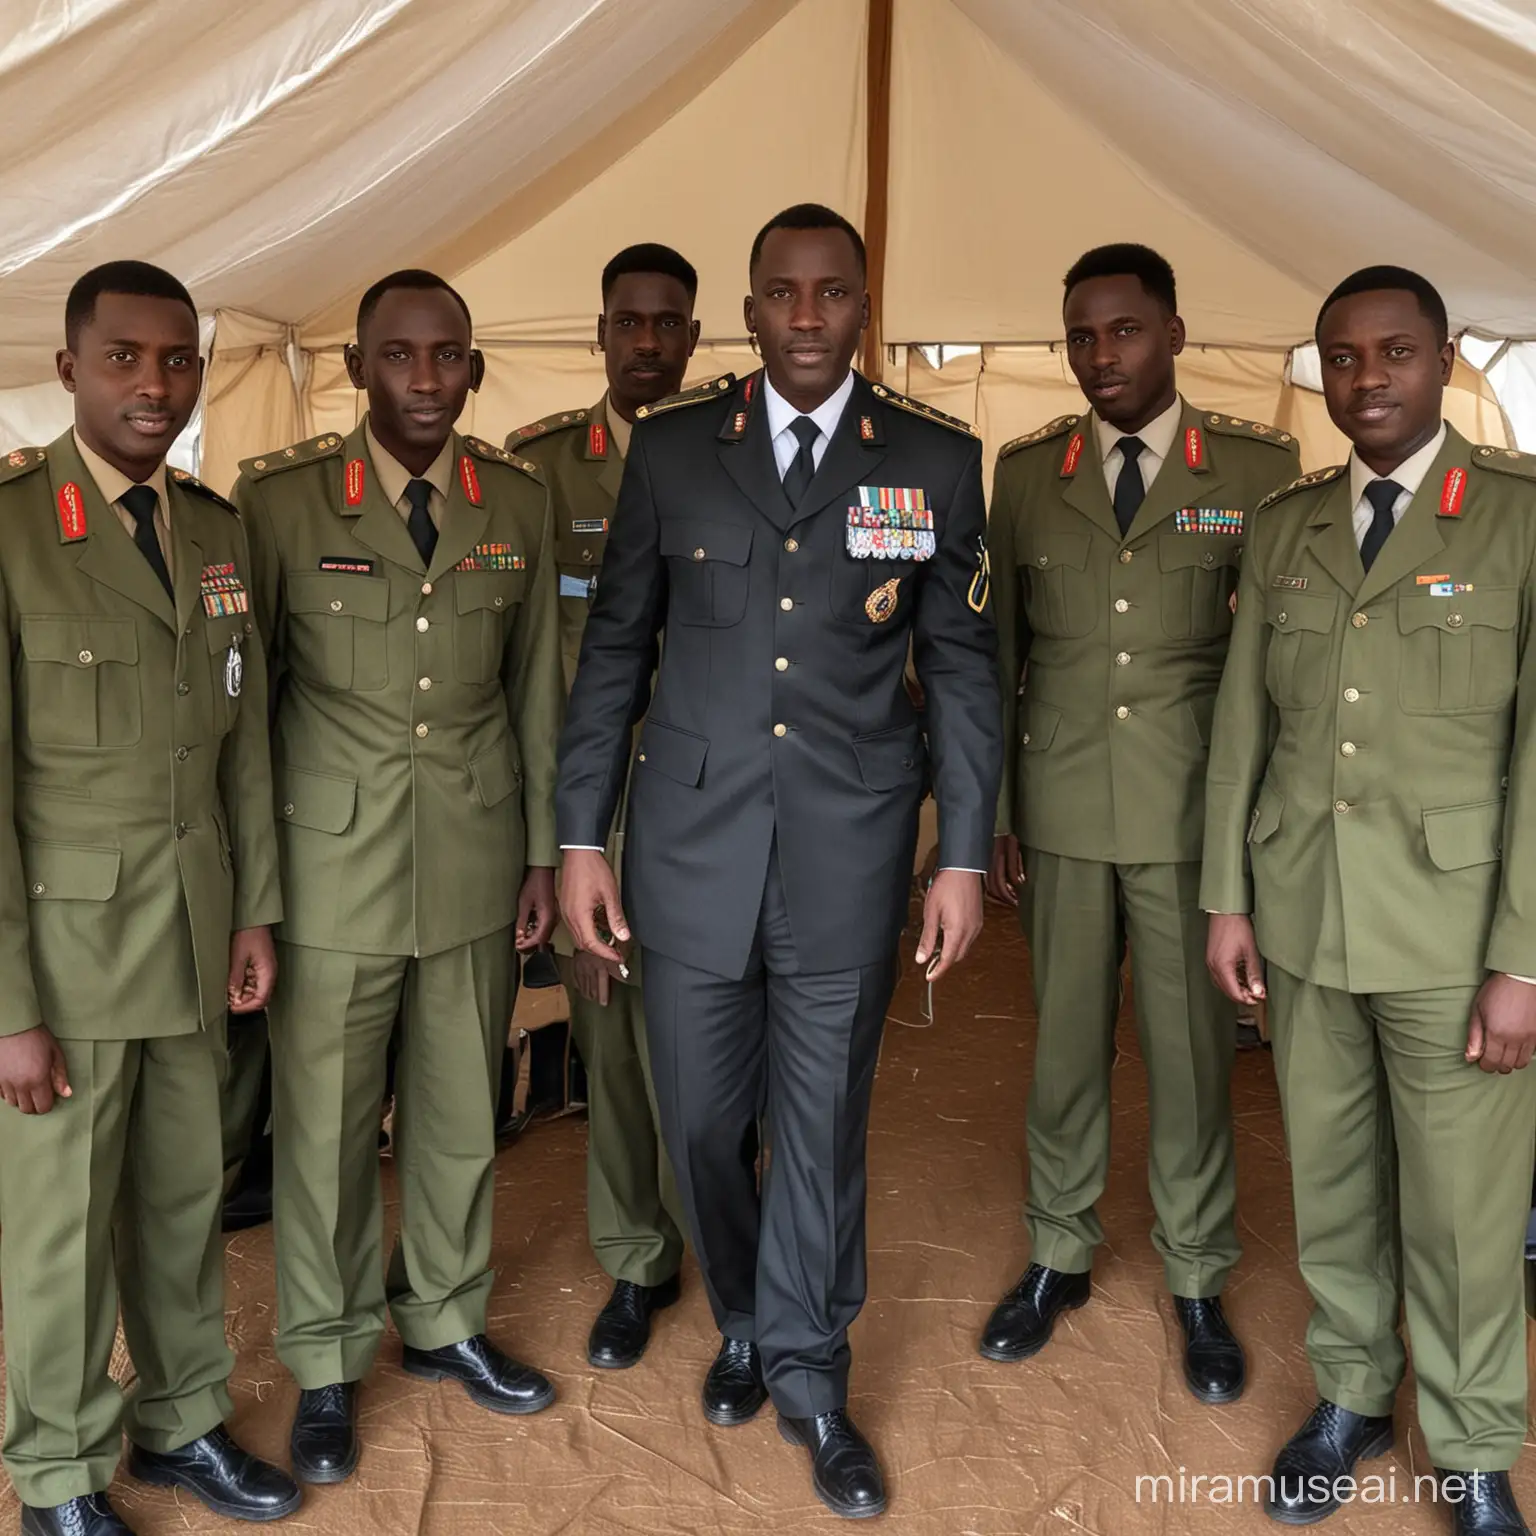 Kenyan defence forces personnels wearing their uniform in a tent and another black man wearing a suit in between them, they must all be black